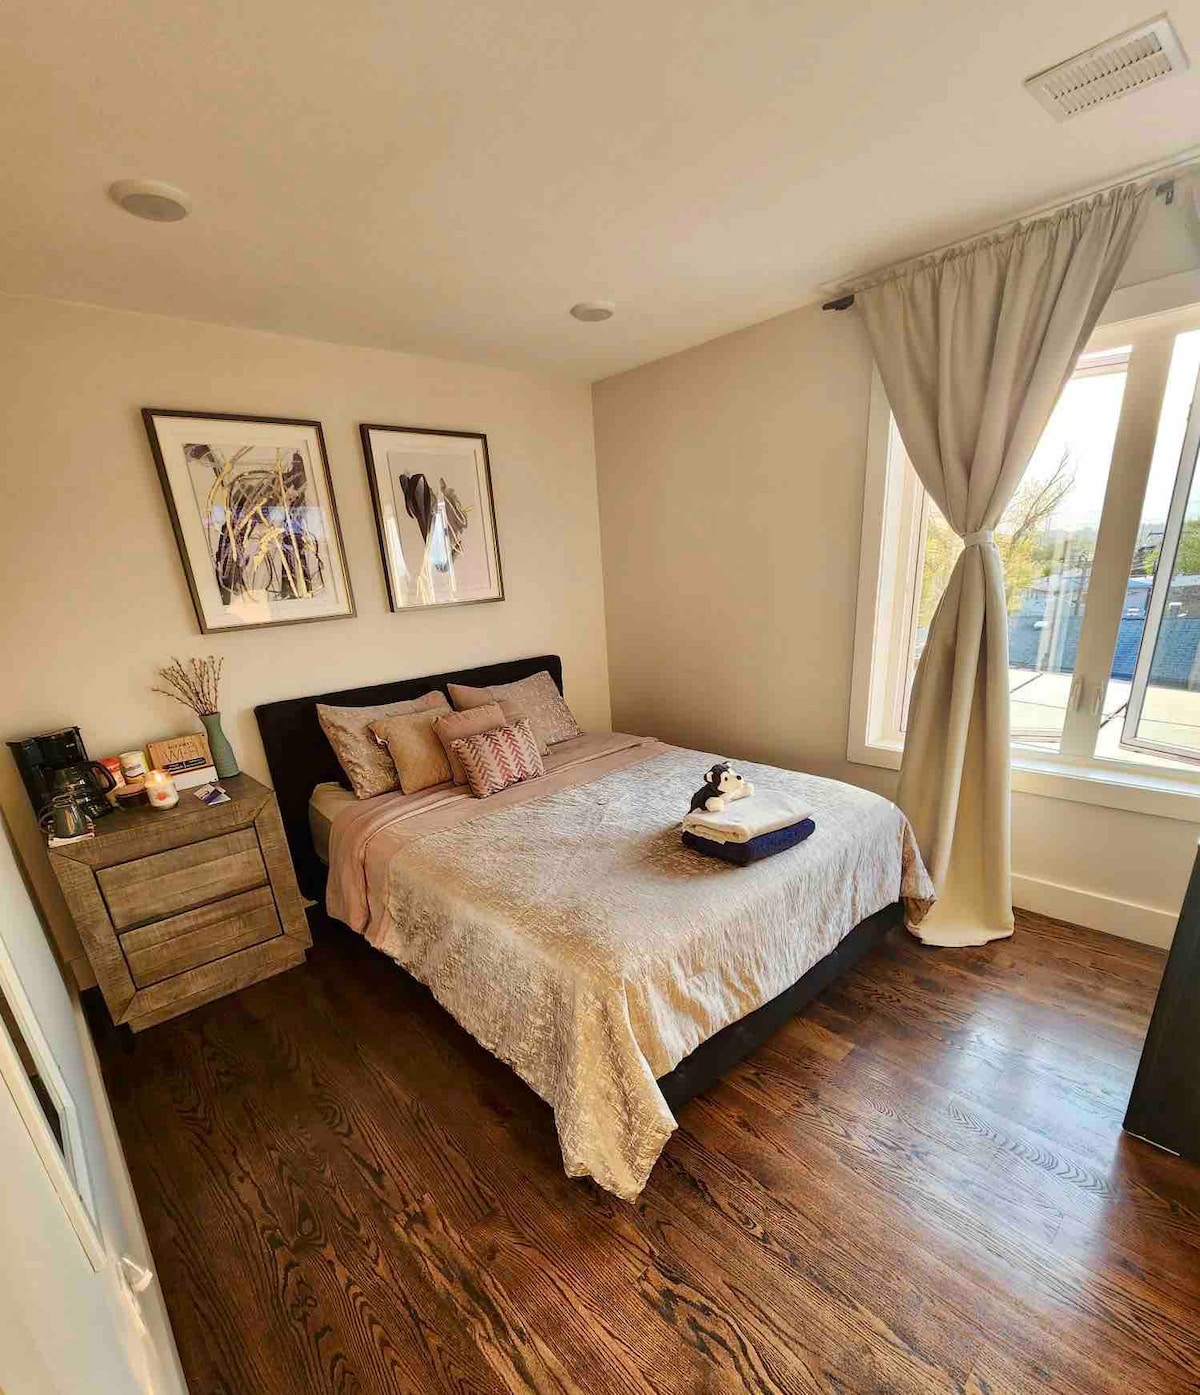 Lovely 1 bedroom in a luxury brand new house.